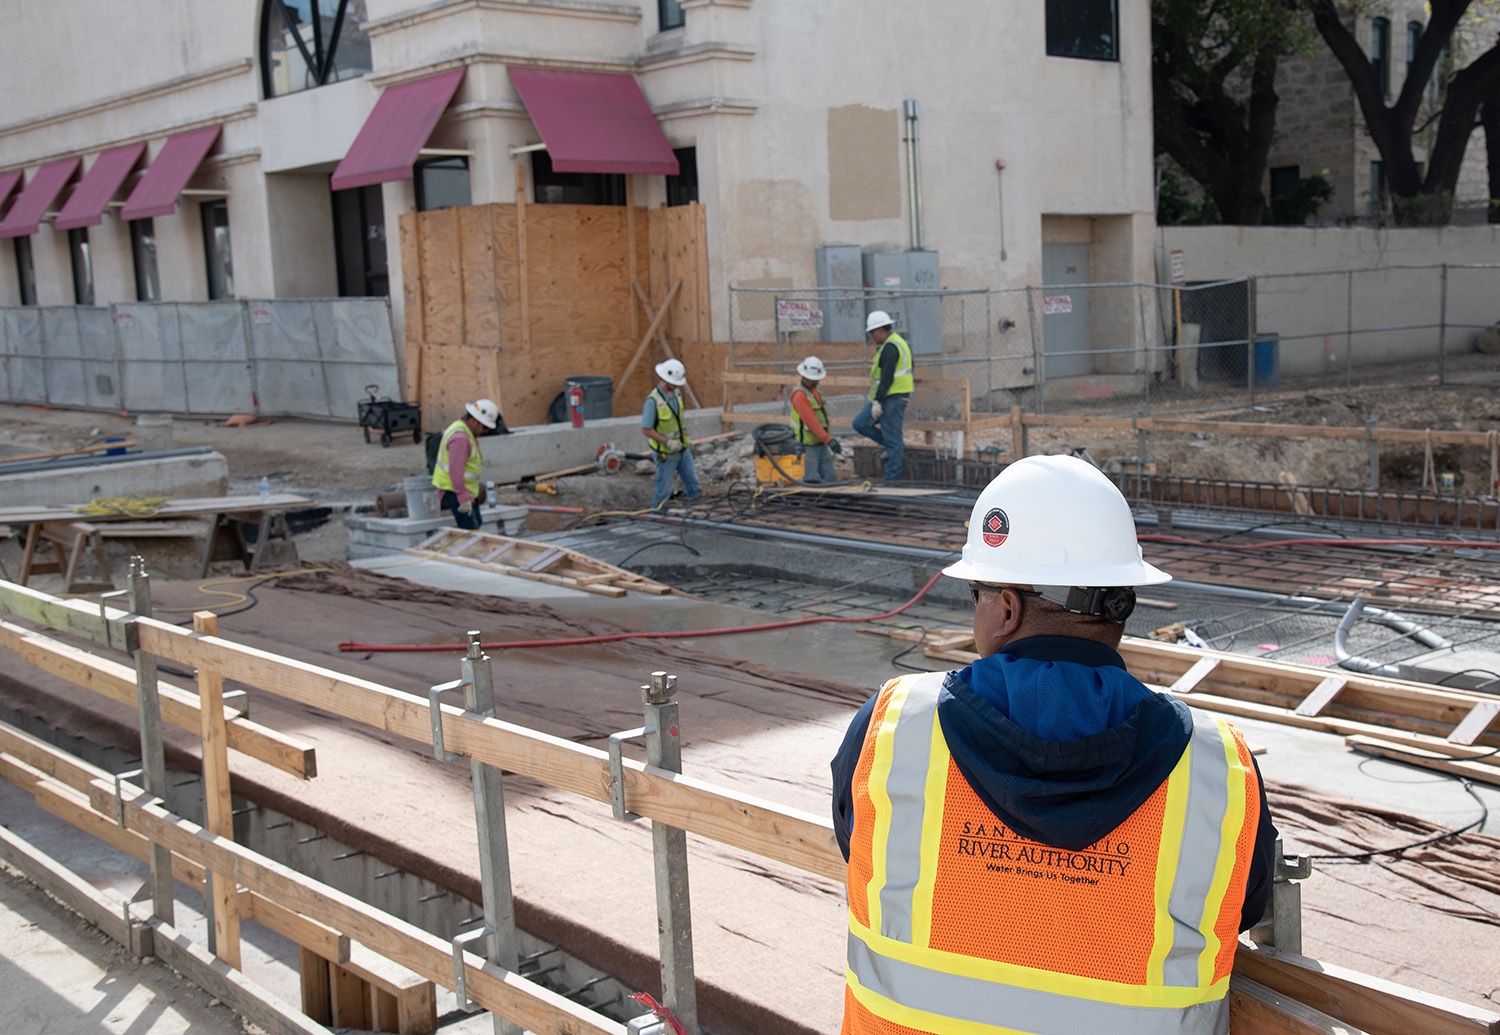 Construction of West Commerce Street related to the San Pedro Creek Culture Park project taken during a tour on Feb. 15, 2019.